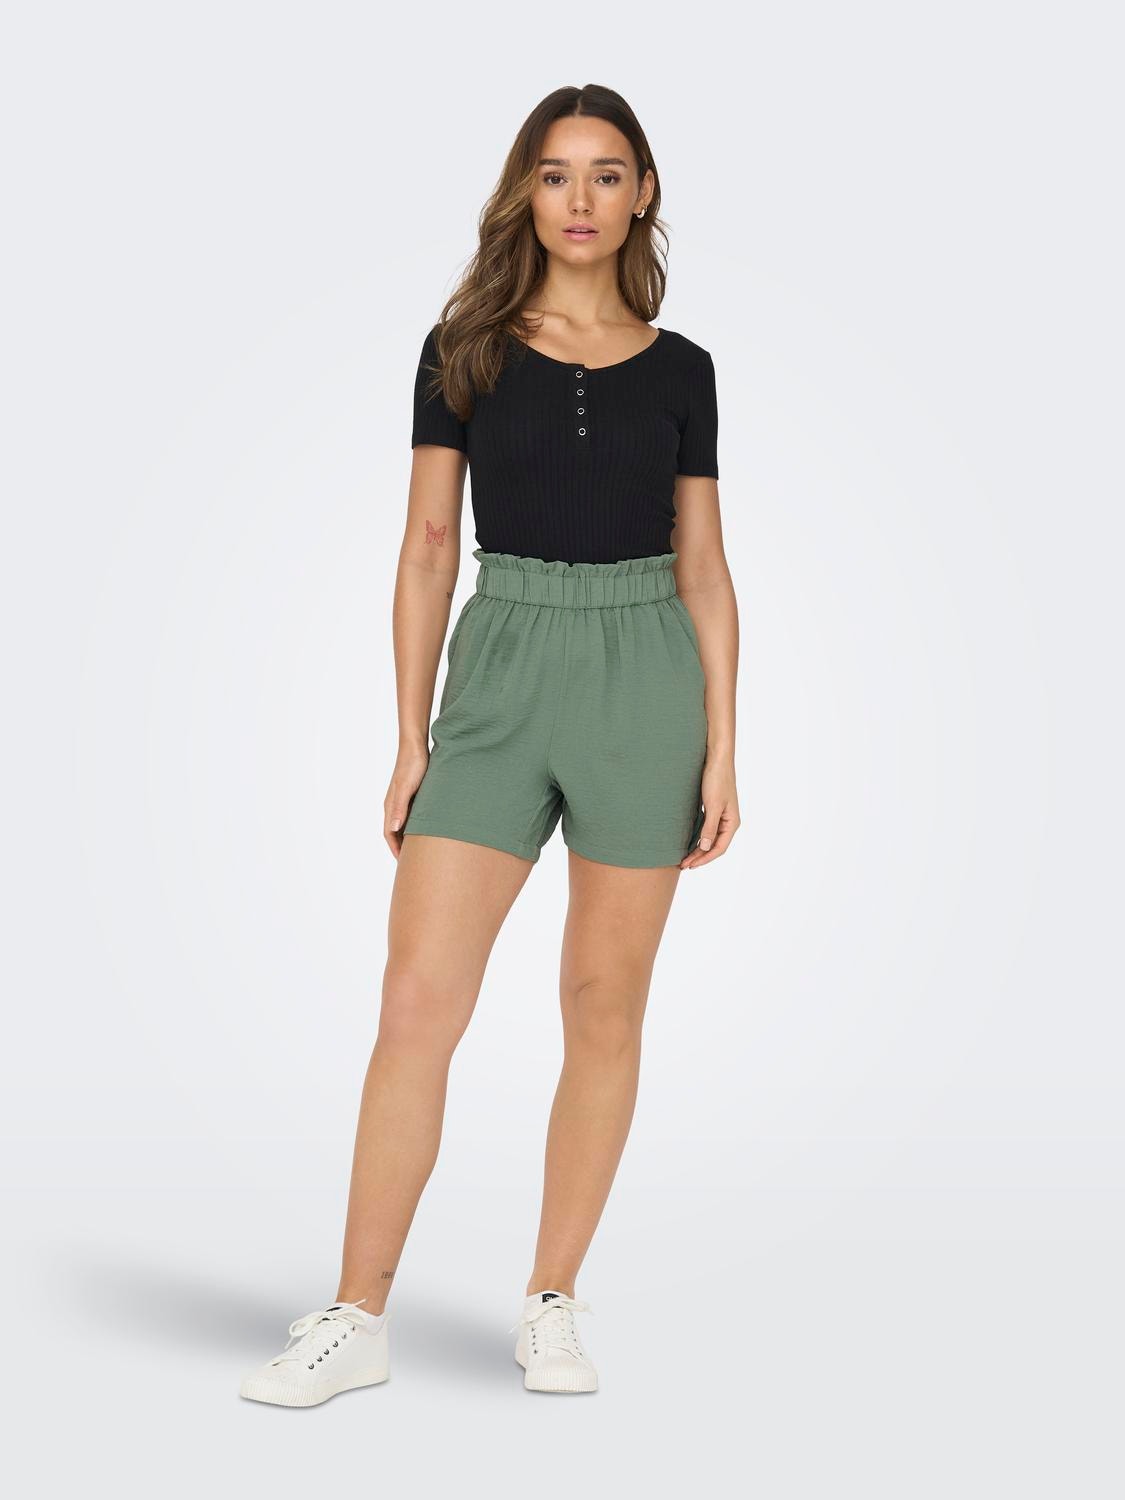 ONLY High Waist Paperbag- Shorts -Sea Spray - 15254848